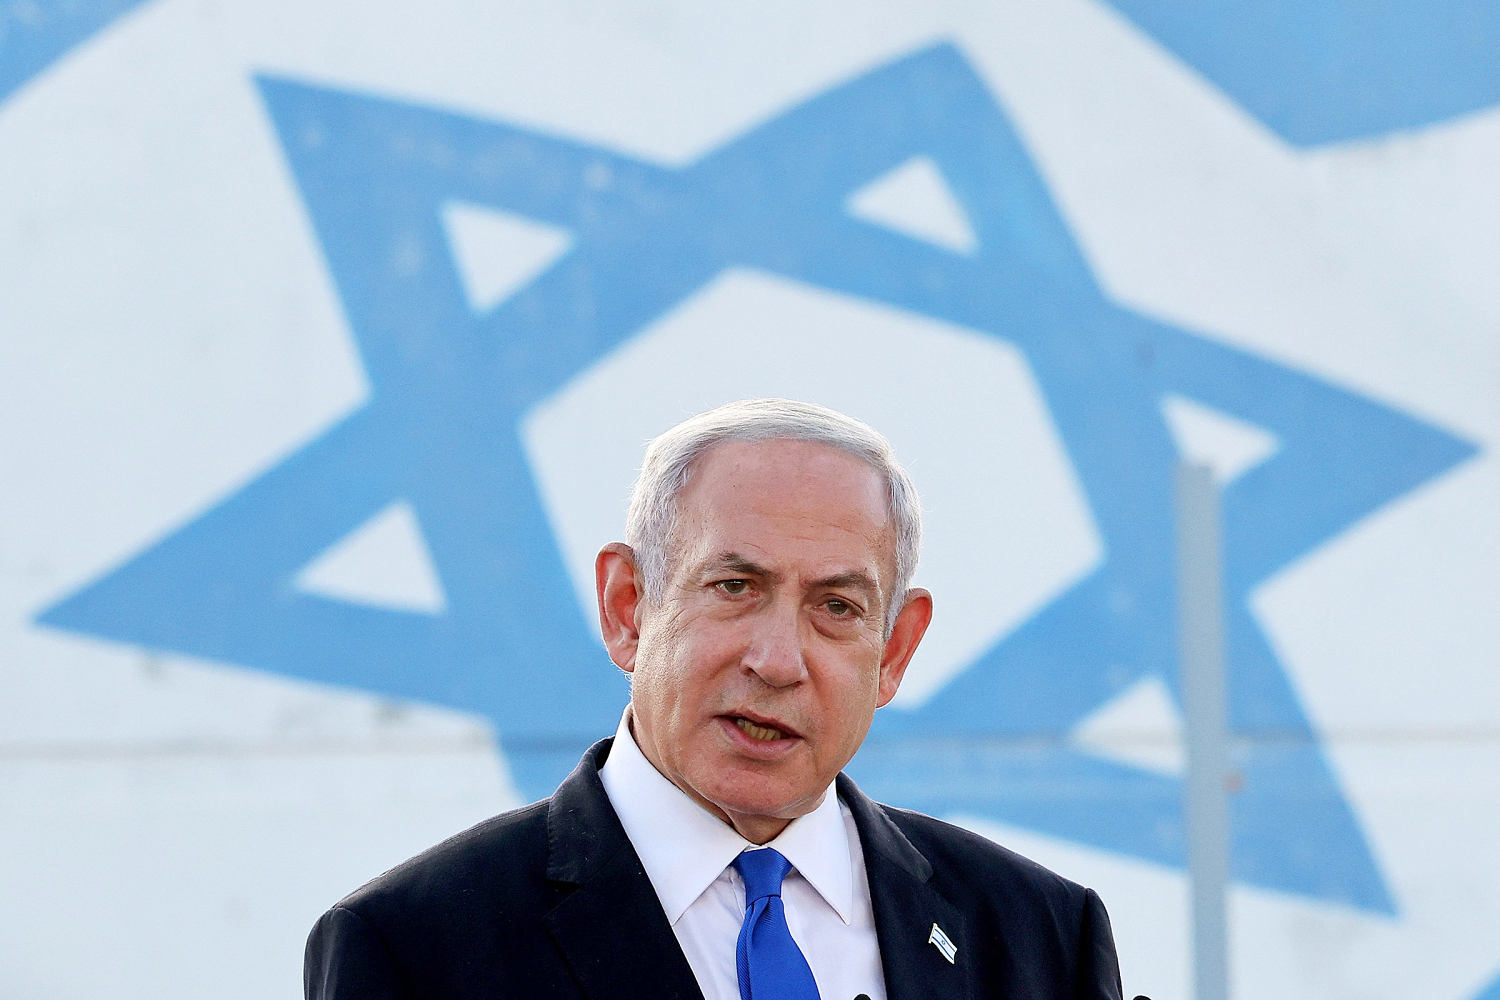 netanyahu's opposition to palestinian state could complicate senate aid package